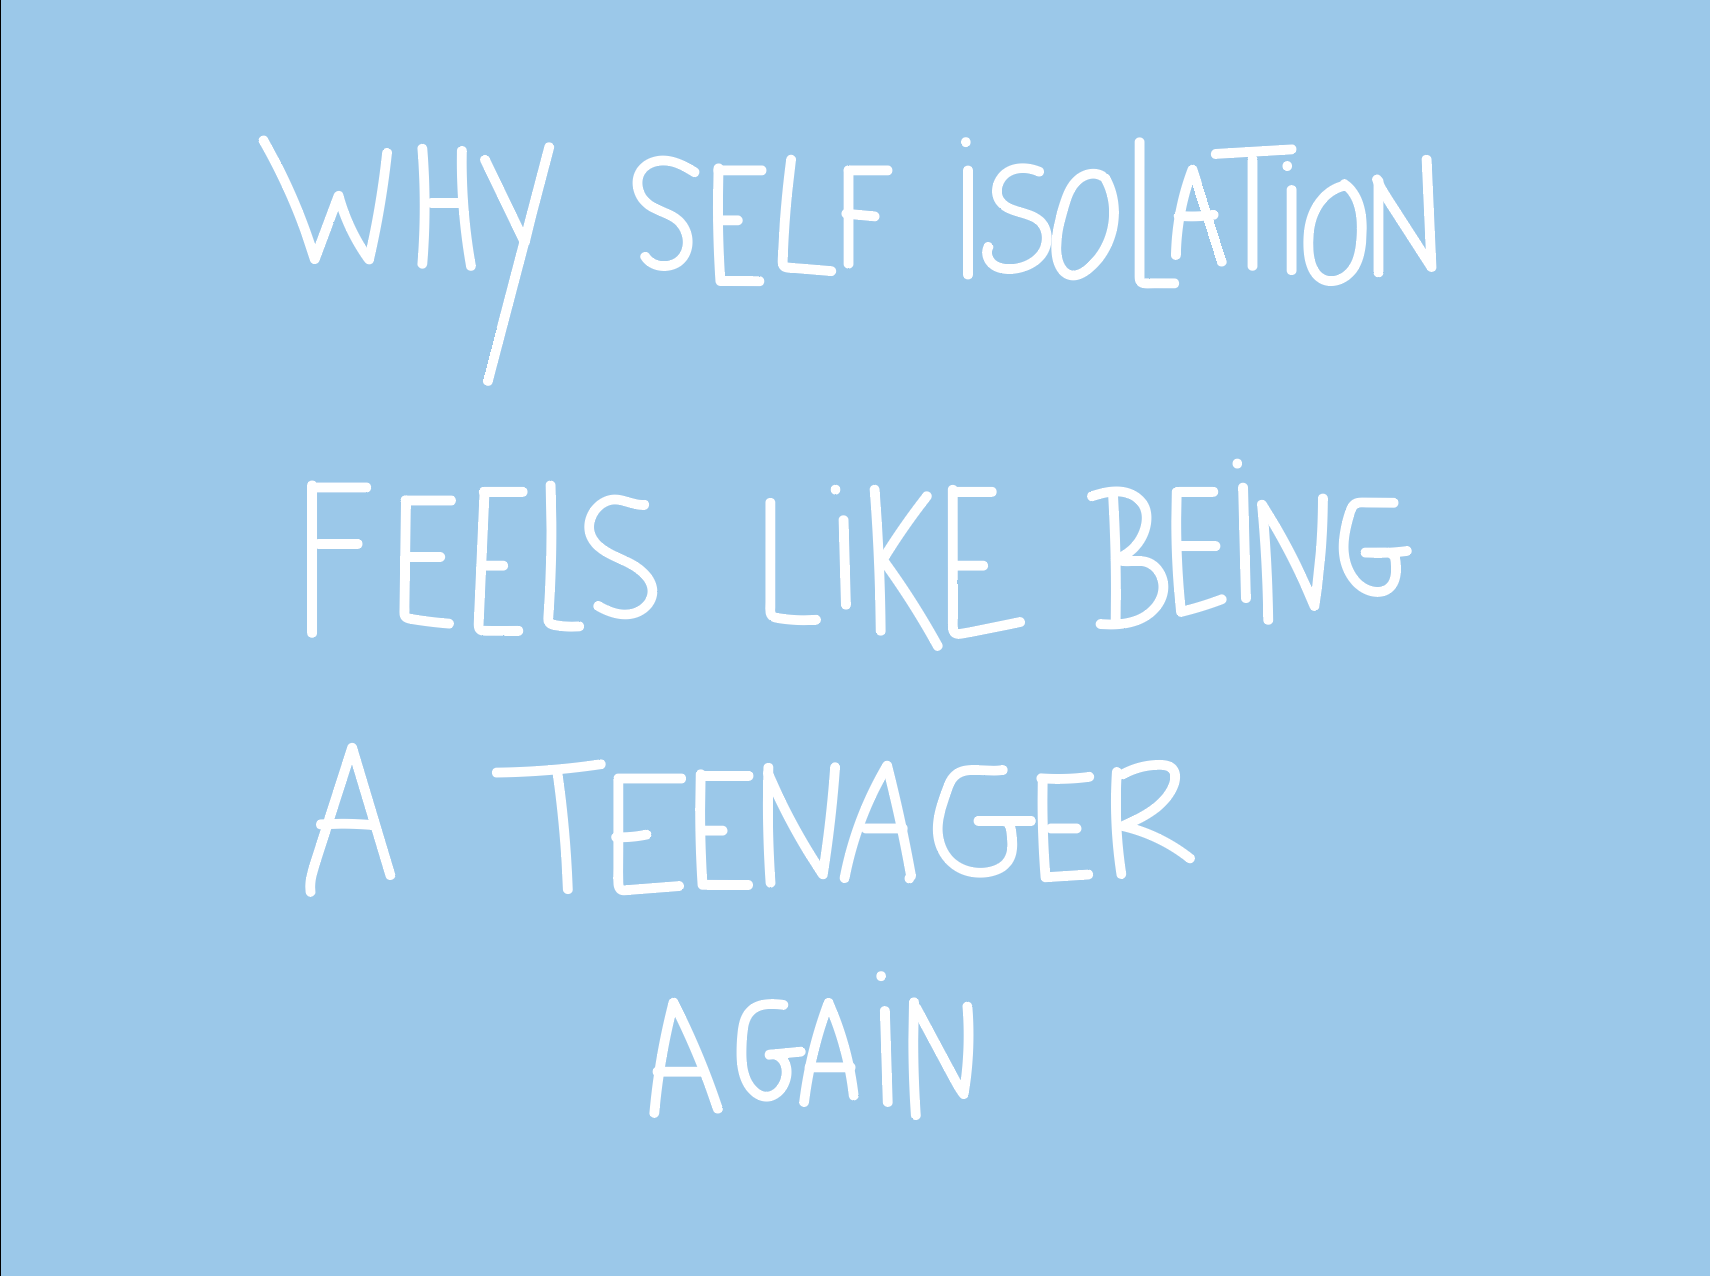 Why self-isolation feels like being a teenager again - The Proper Label ®